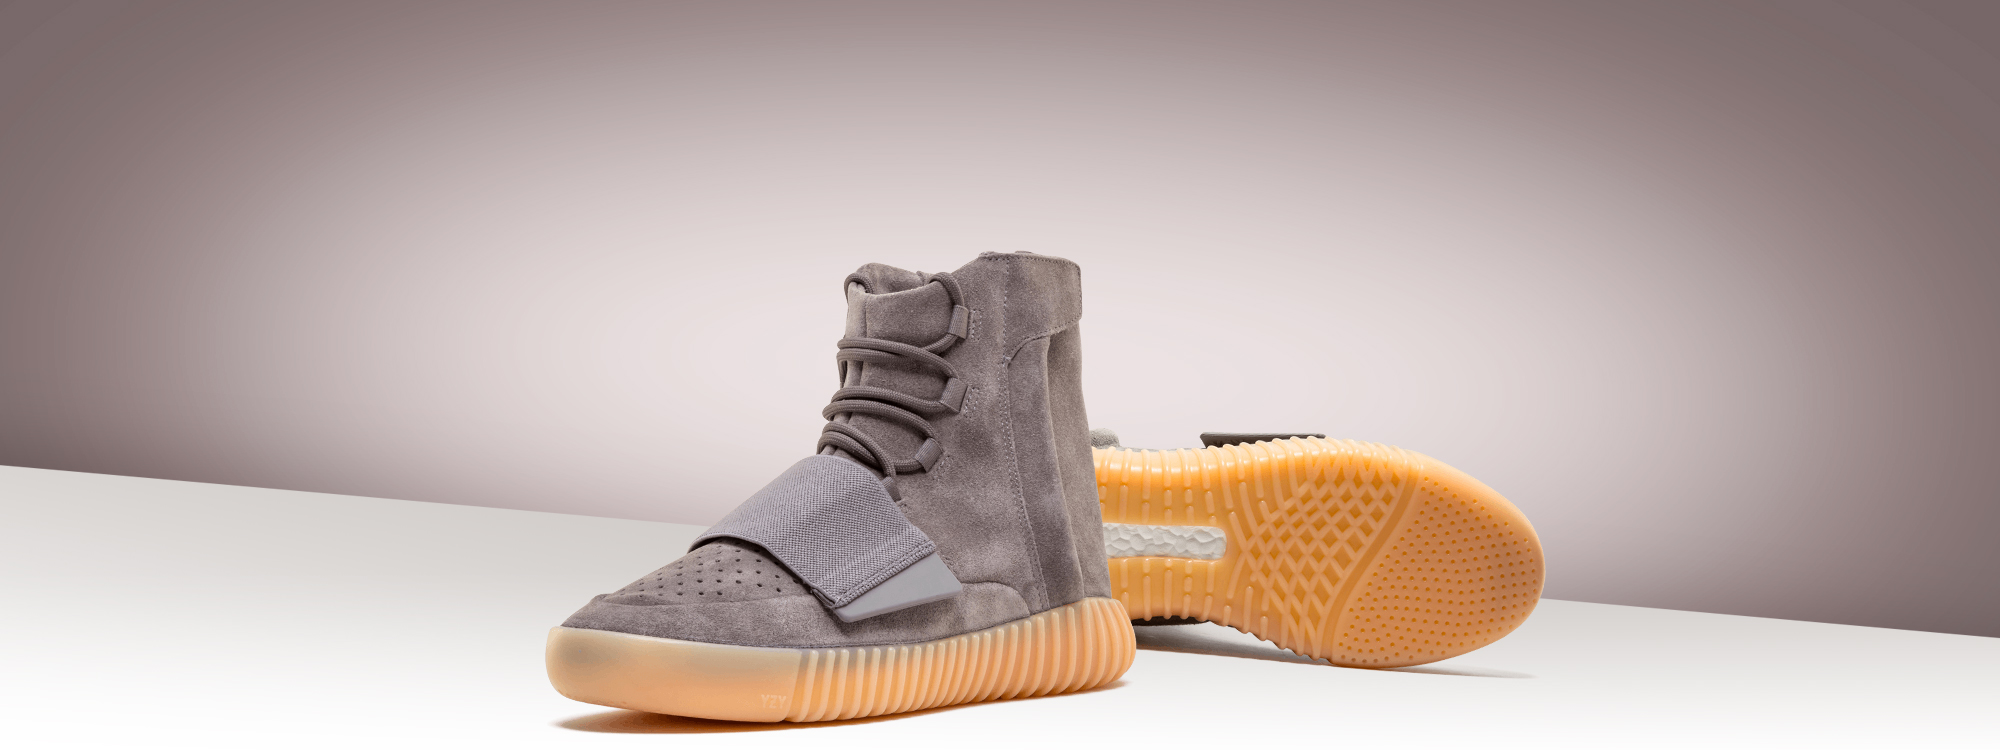 real cheap  Yeezy Boost 750  Light Grey / Gum for sale